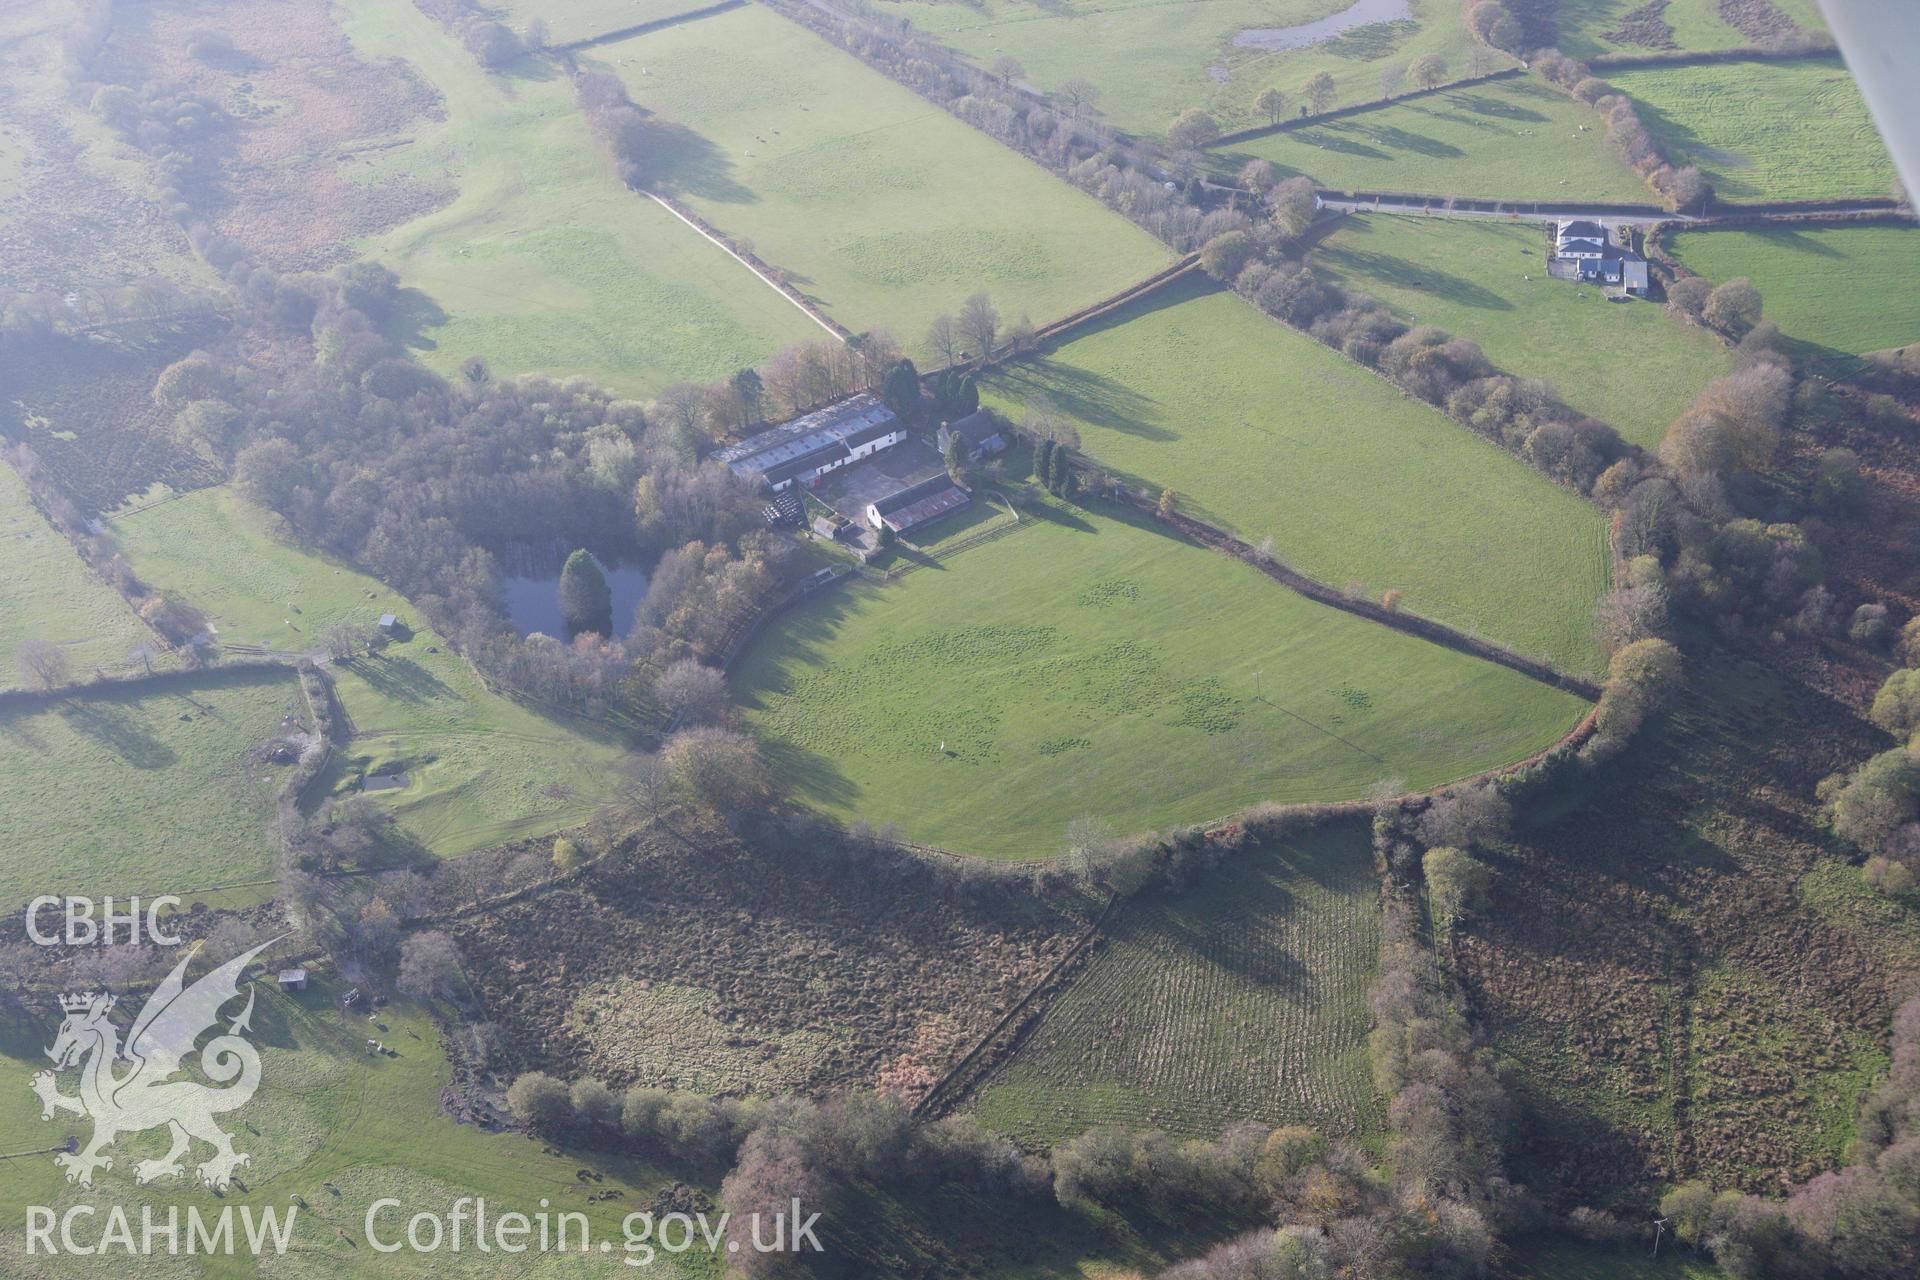 RCAHMW colour oblique aerial photograph of Llanio Roman Fort. Taken on 09 November 2009 by Toby Driver